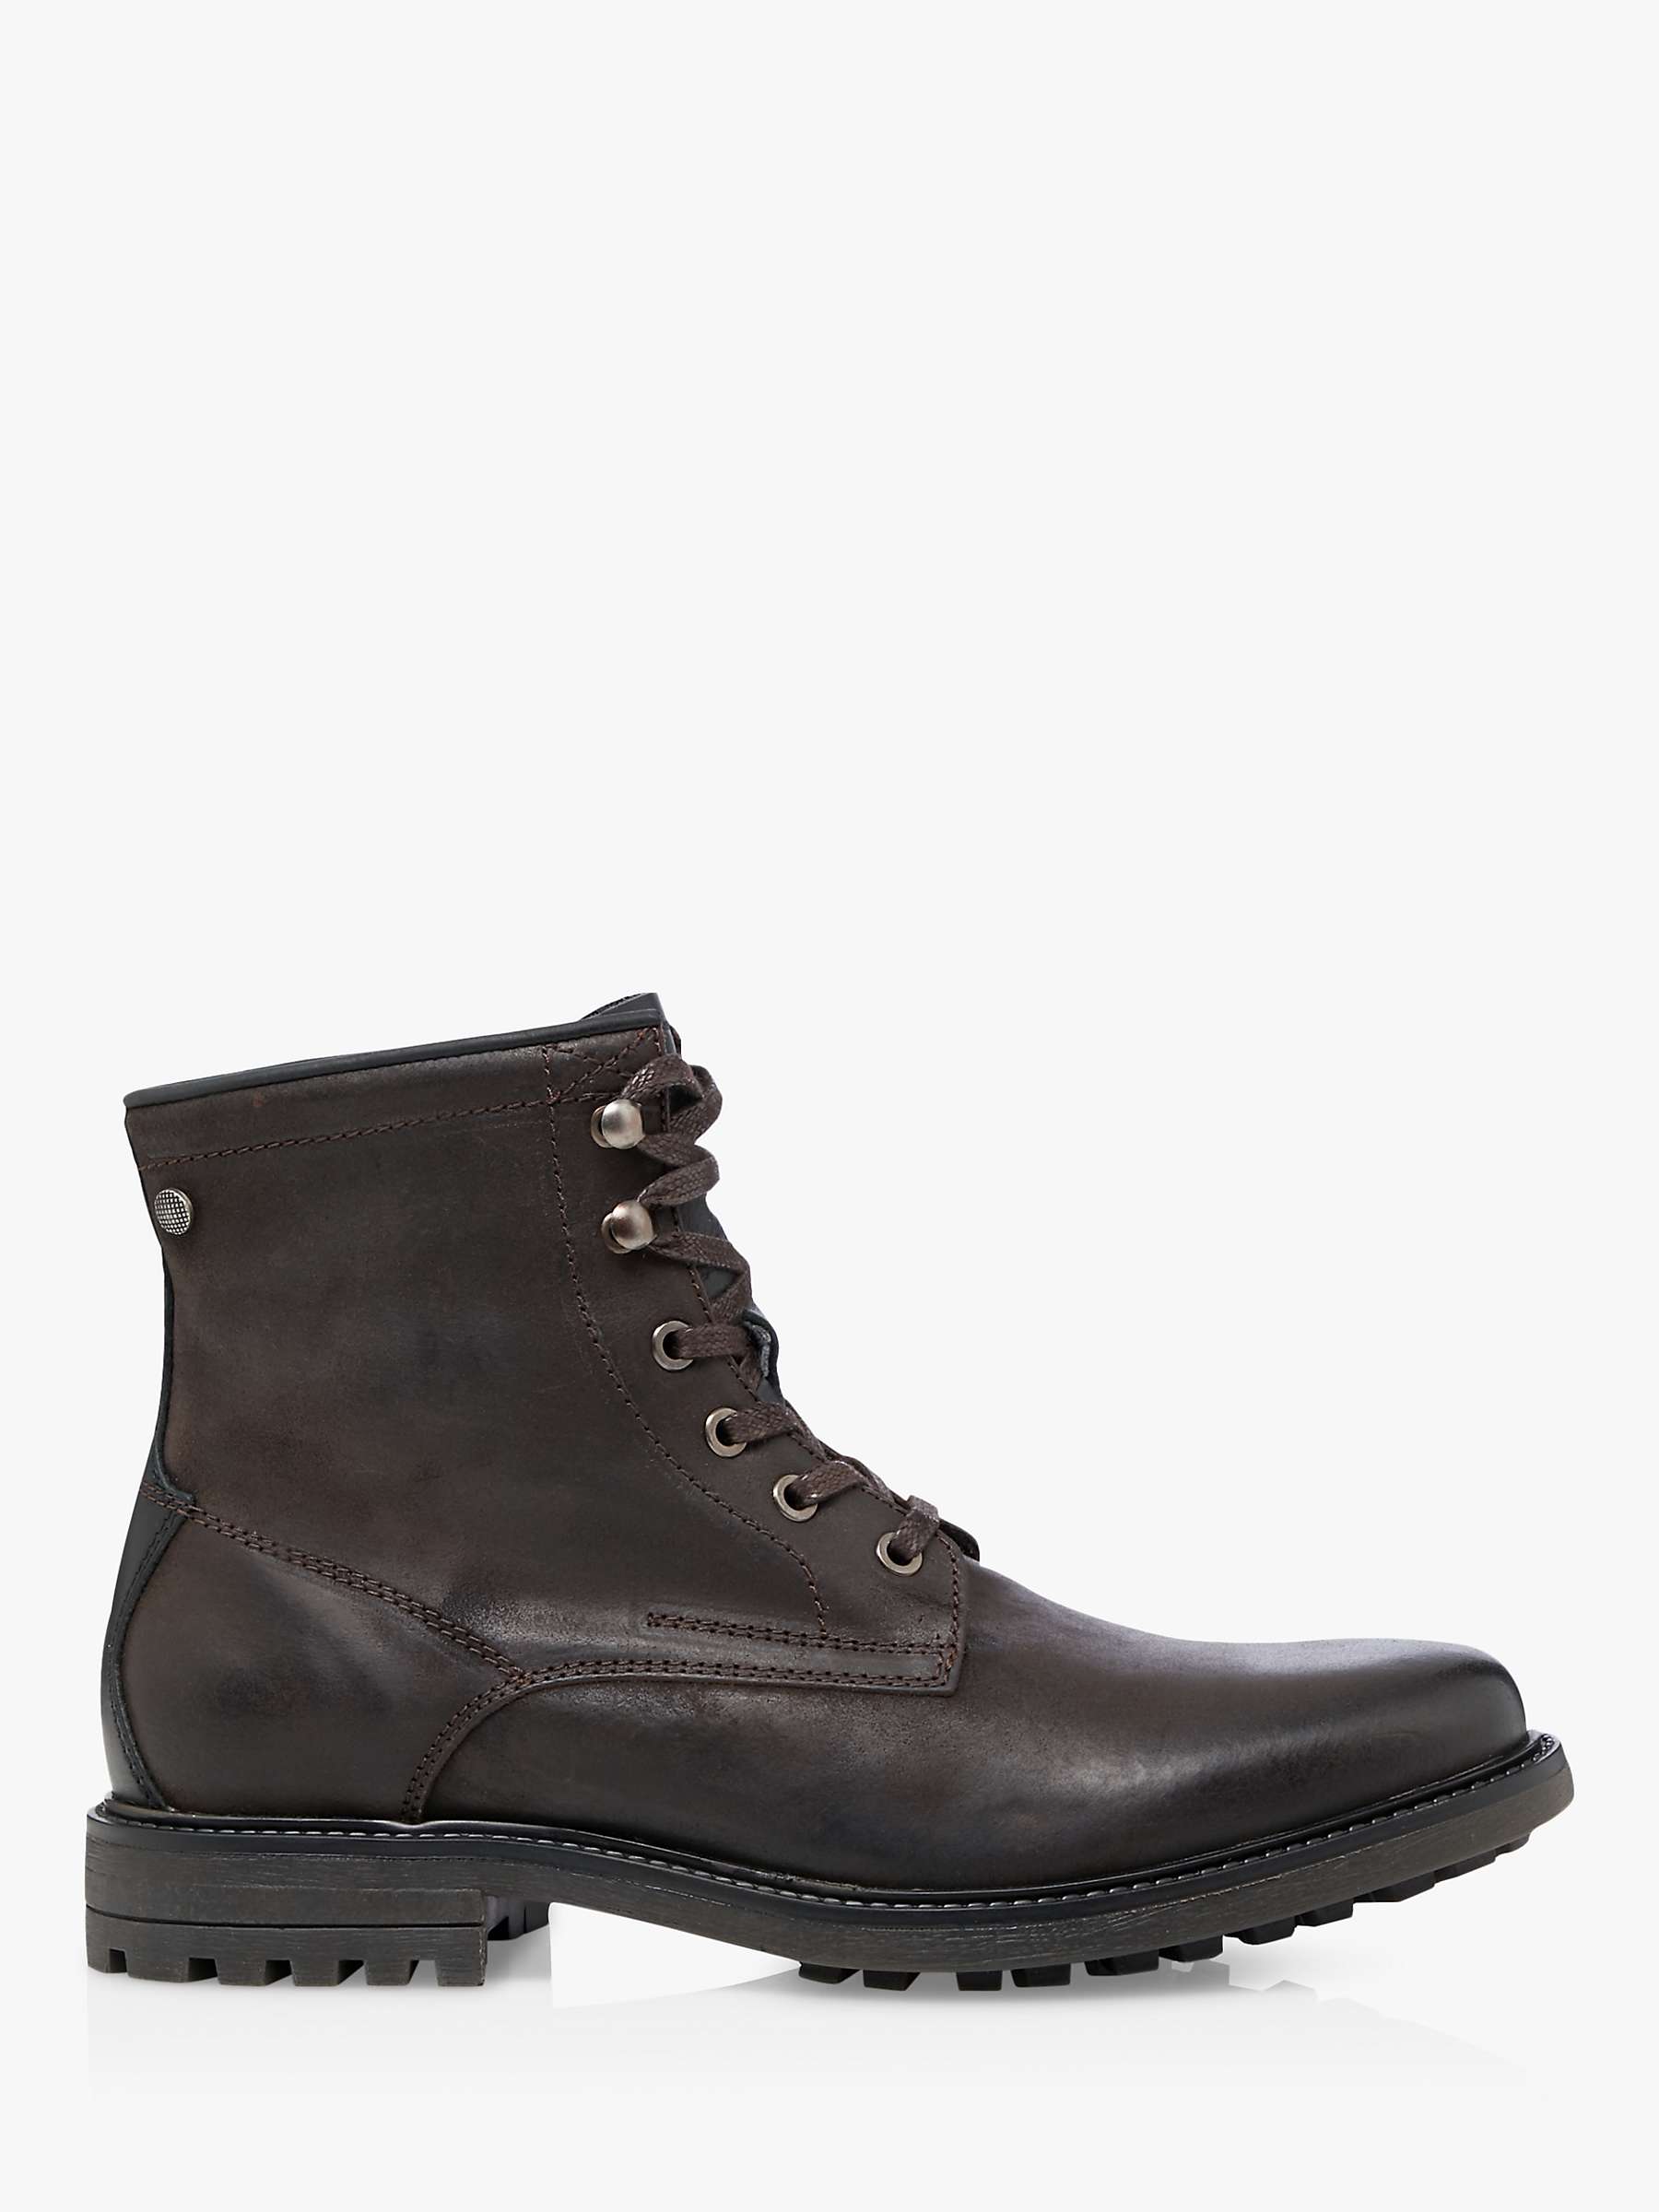 Buy Dune Credit Lace Up Leather Boots, Brown Online at johnlewis.com